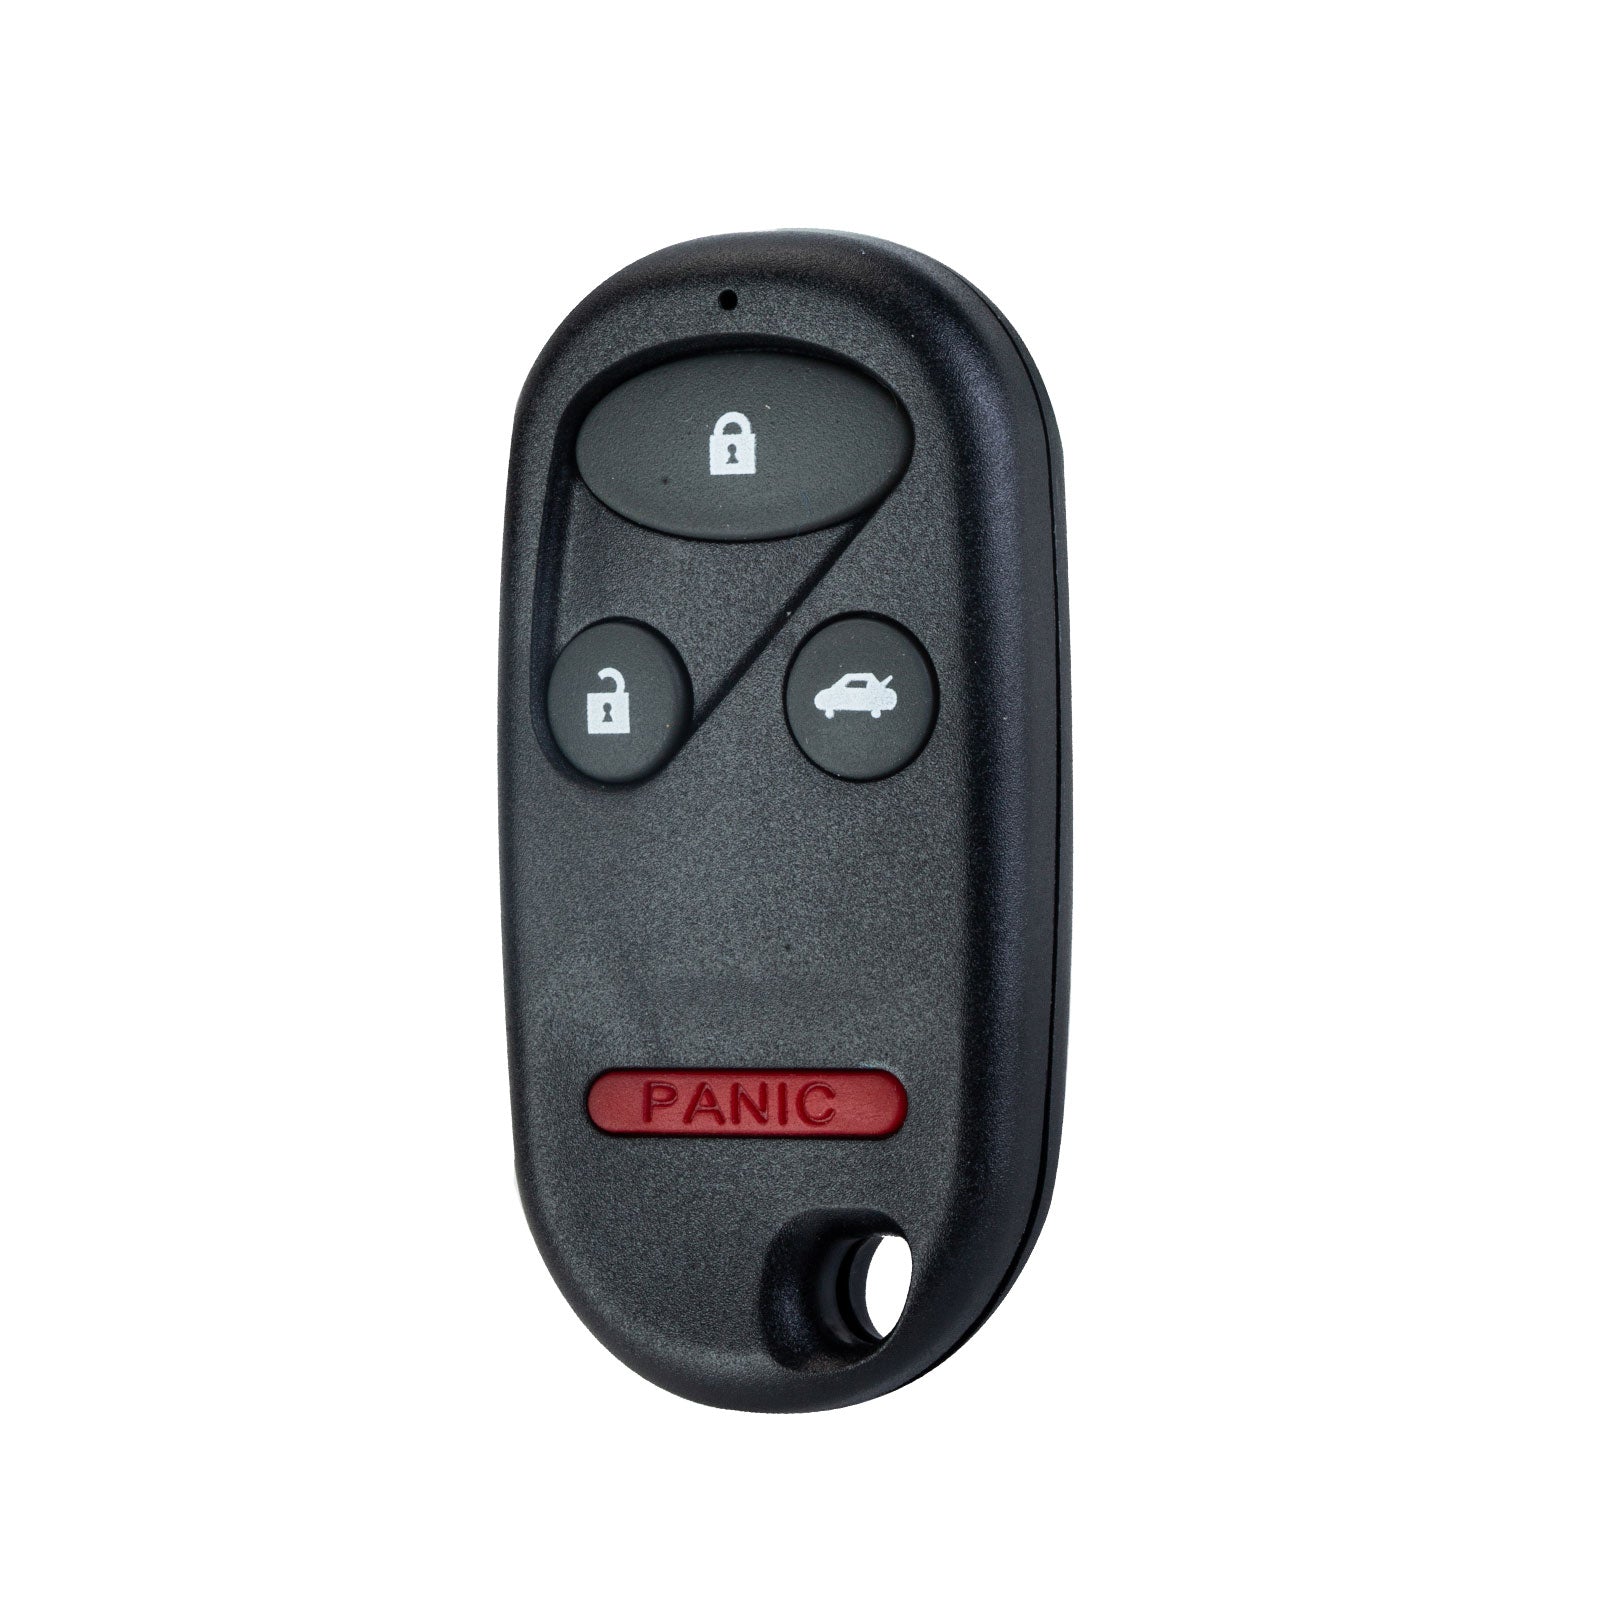 4 BTN Car Key Fob Replacement for Keyless Entry Remote for 2002-2004 Honda CR-V OUCG8D-344H-A  KR-H4RA